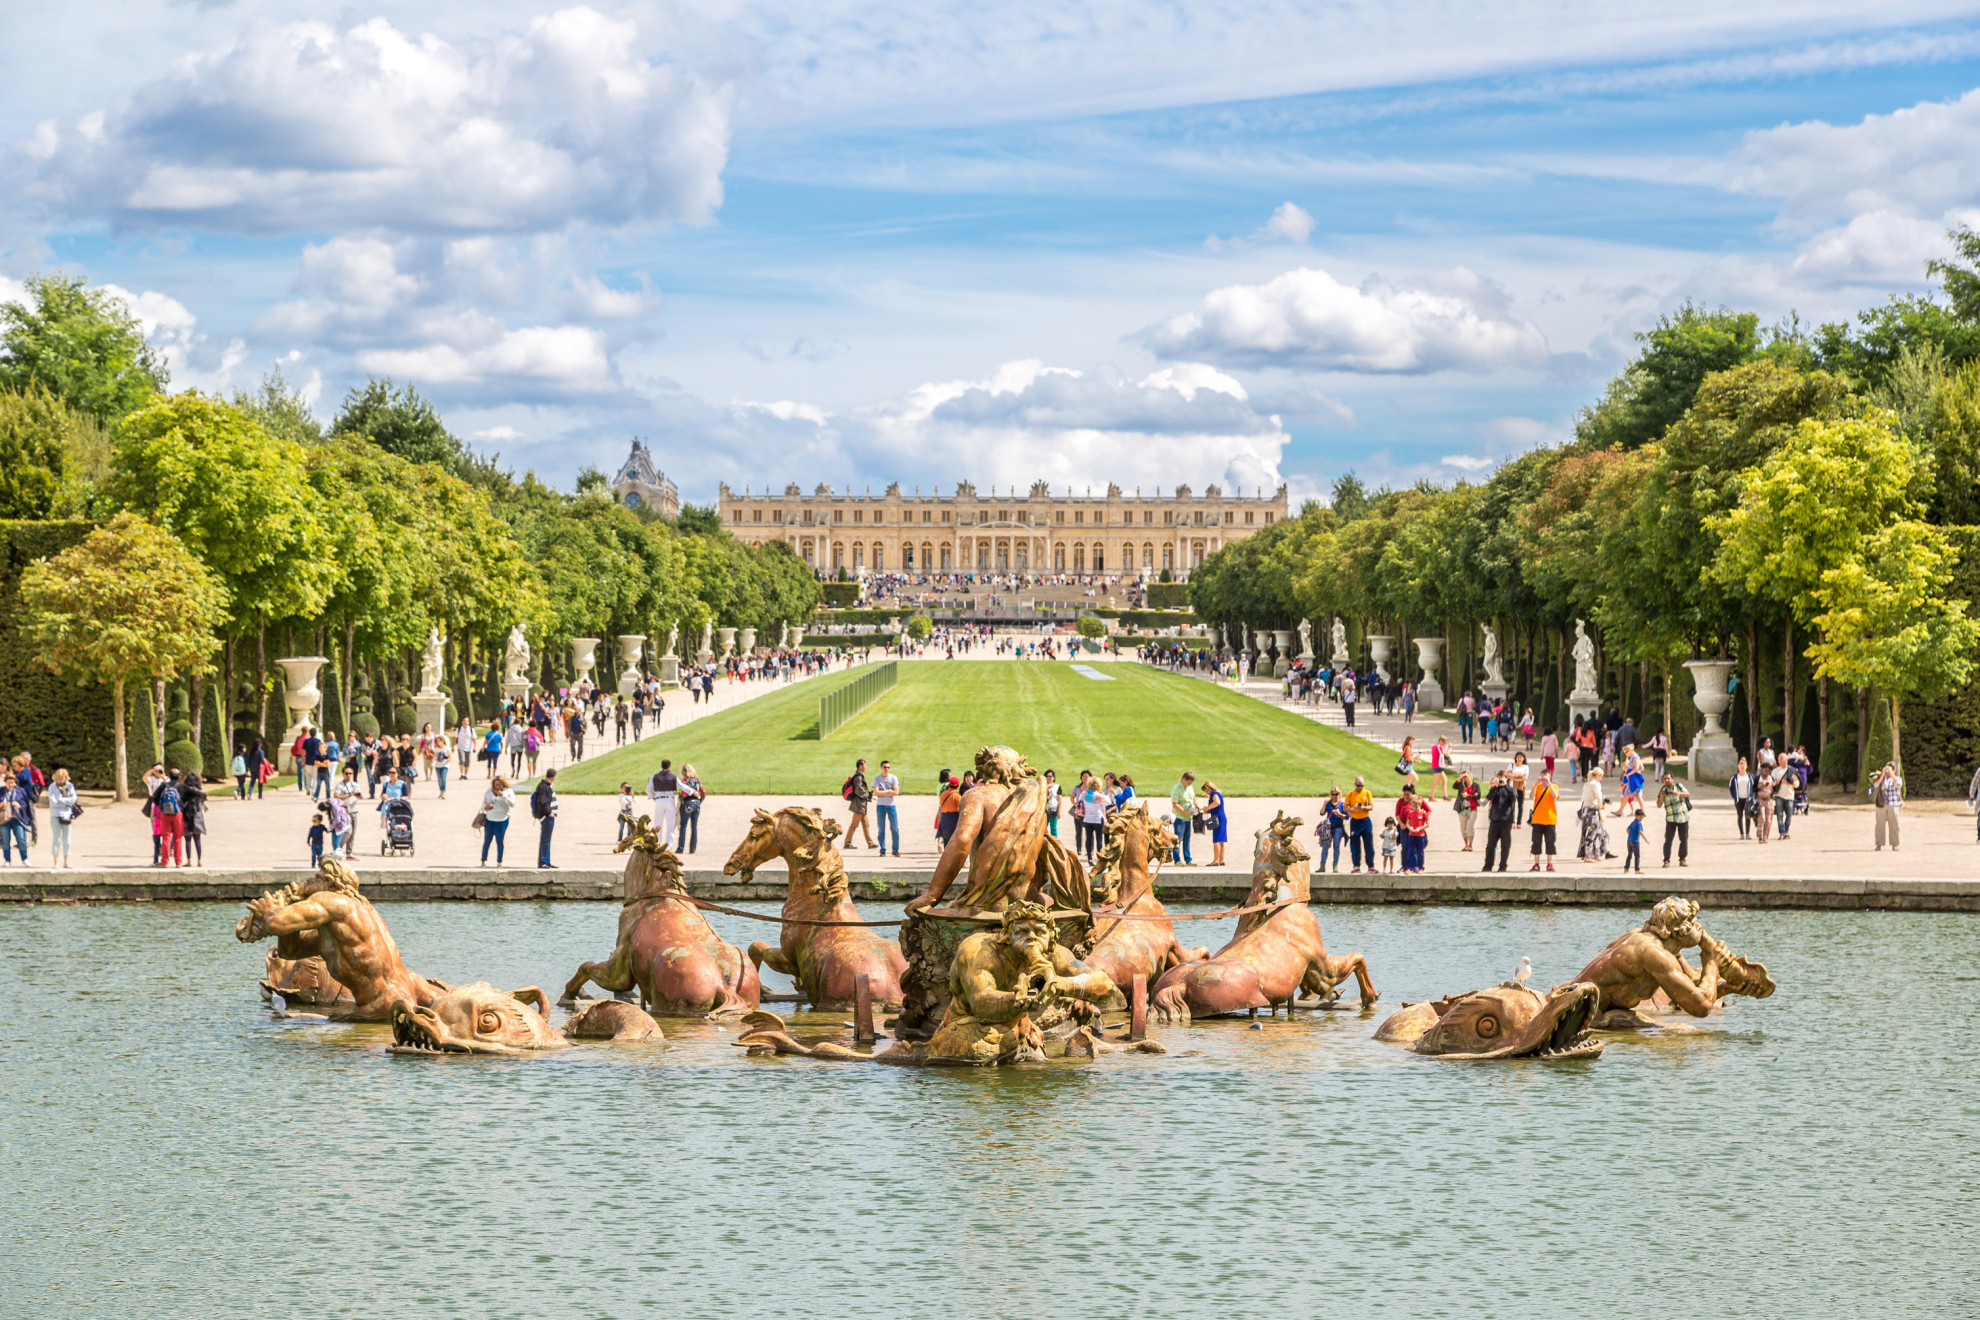 The fountain in front of the Palace of Versailles © Shutterstock